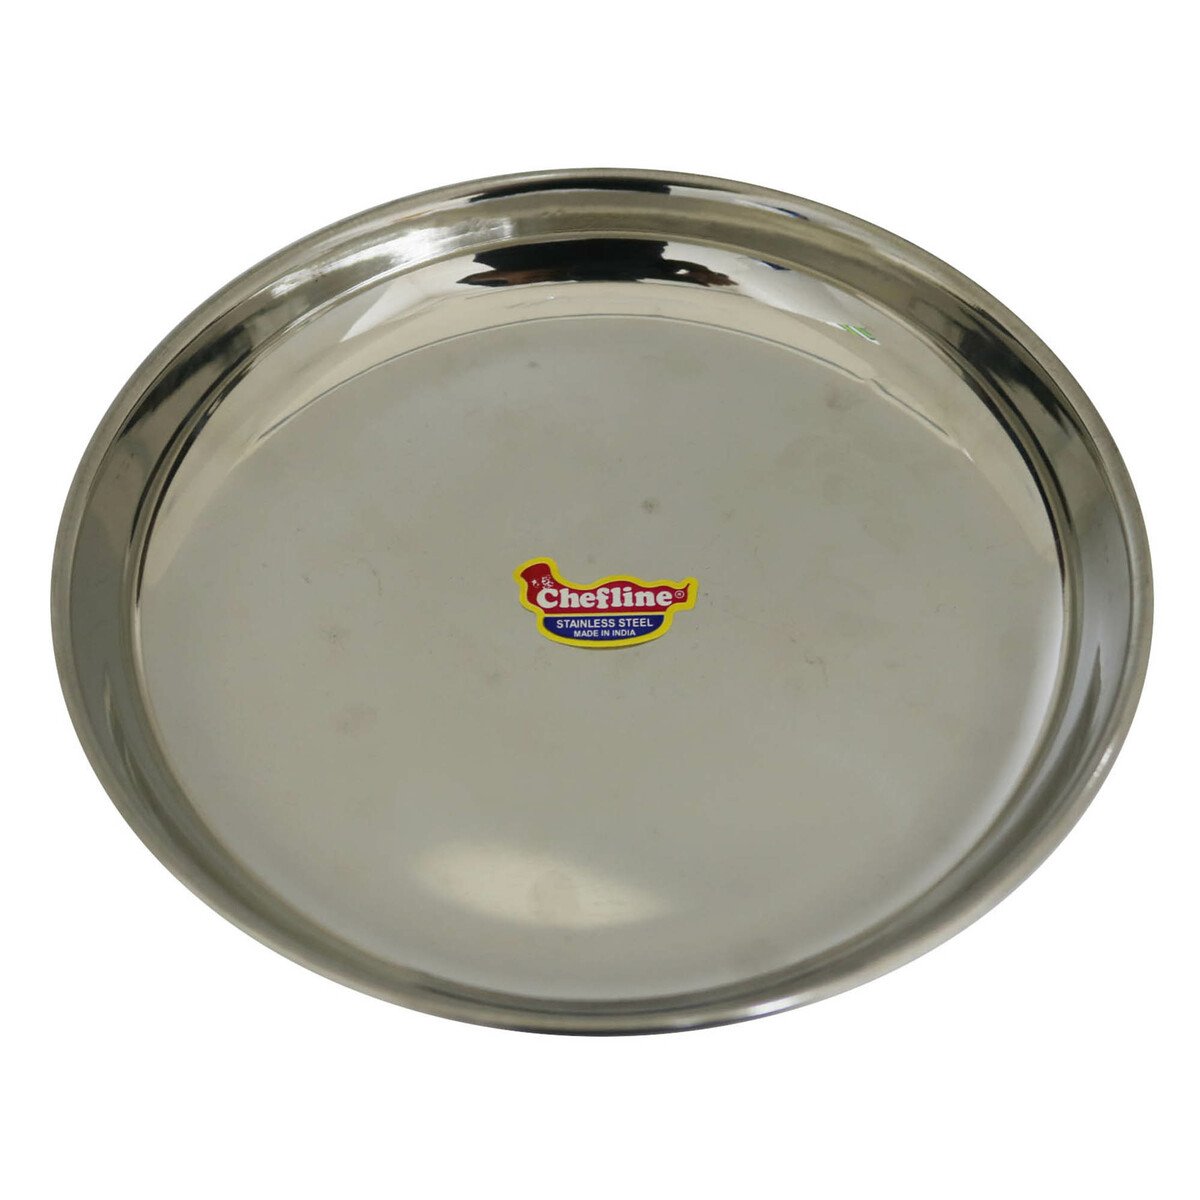 Chefline Stainless Steel Halwa Plate No.8 Ind